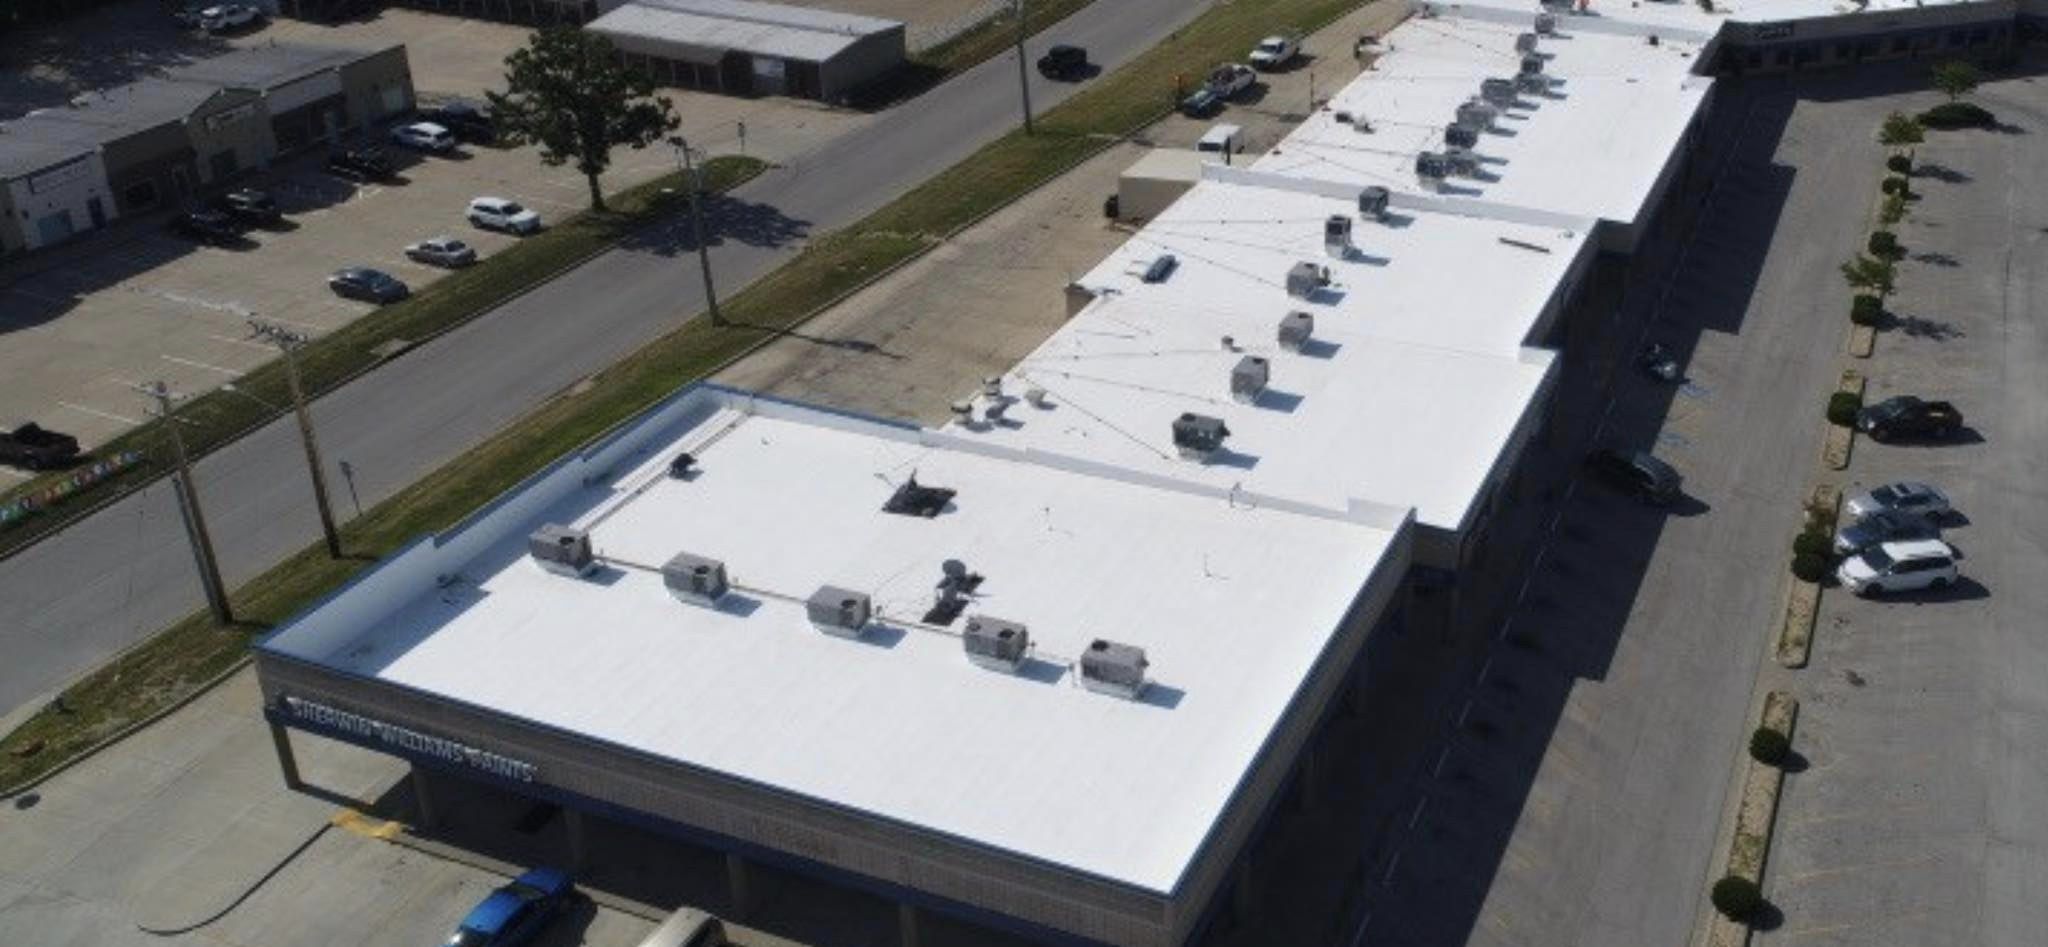 Commercial roofing services in Edwardsville, Glen Carbon, and Troy, IL